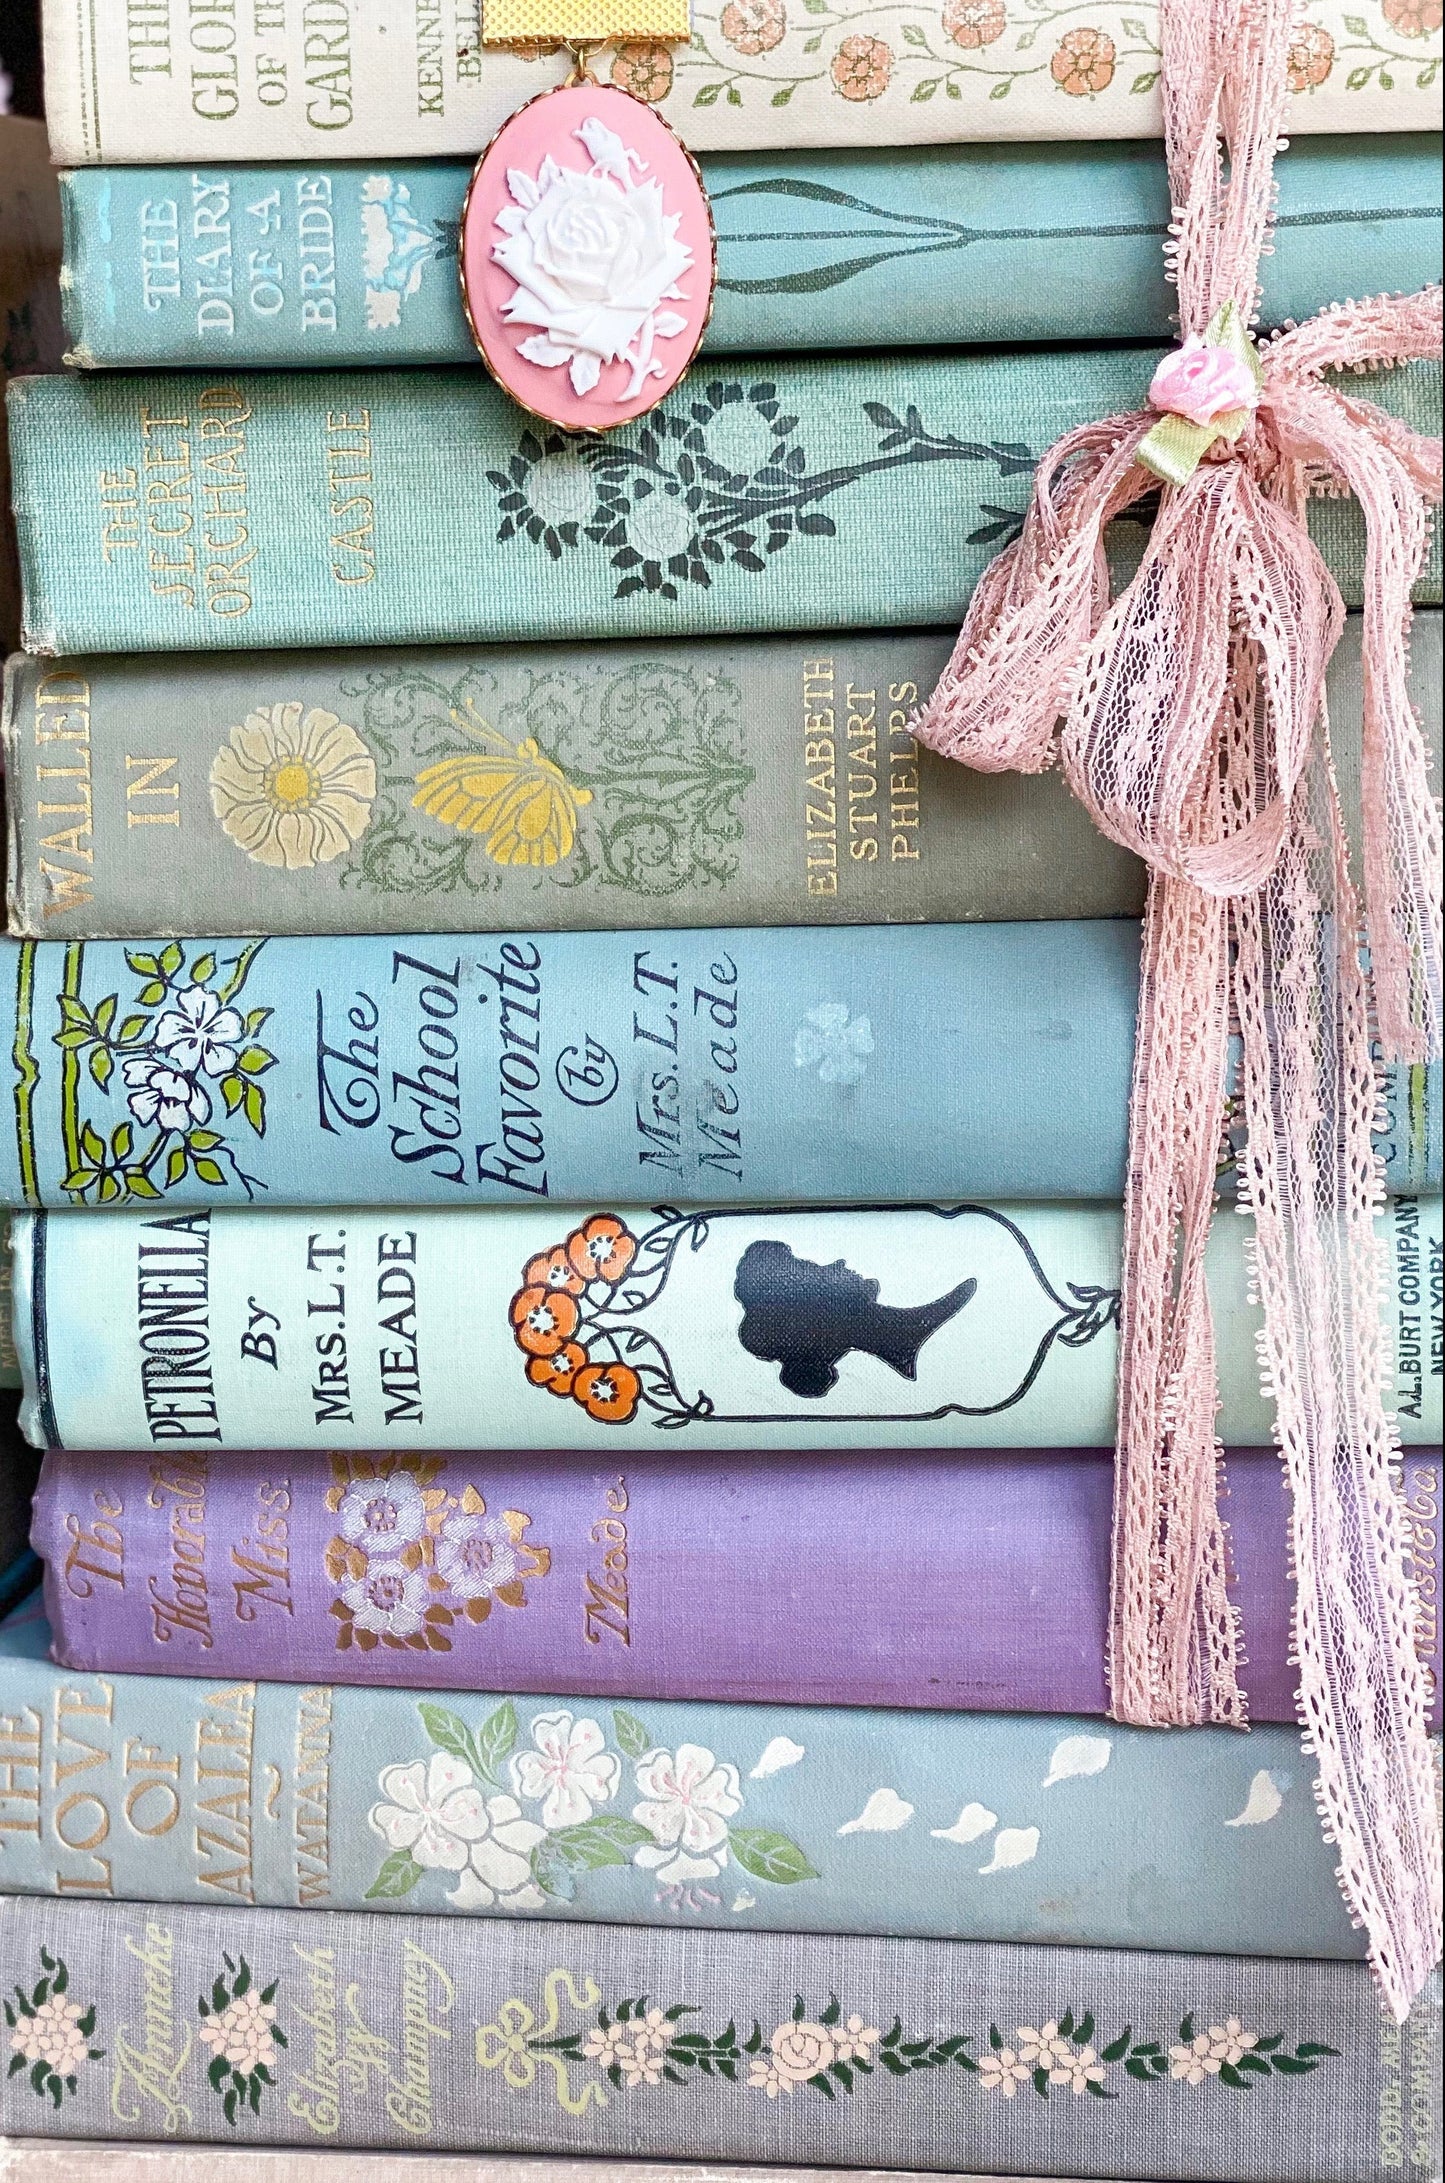 Pastel Floral Vintage Bookspines Gallery Wrapped Canvas